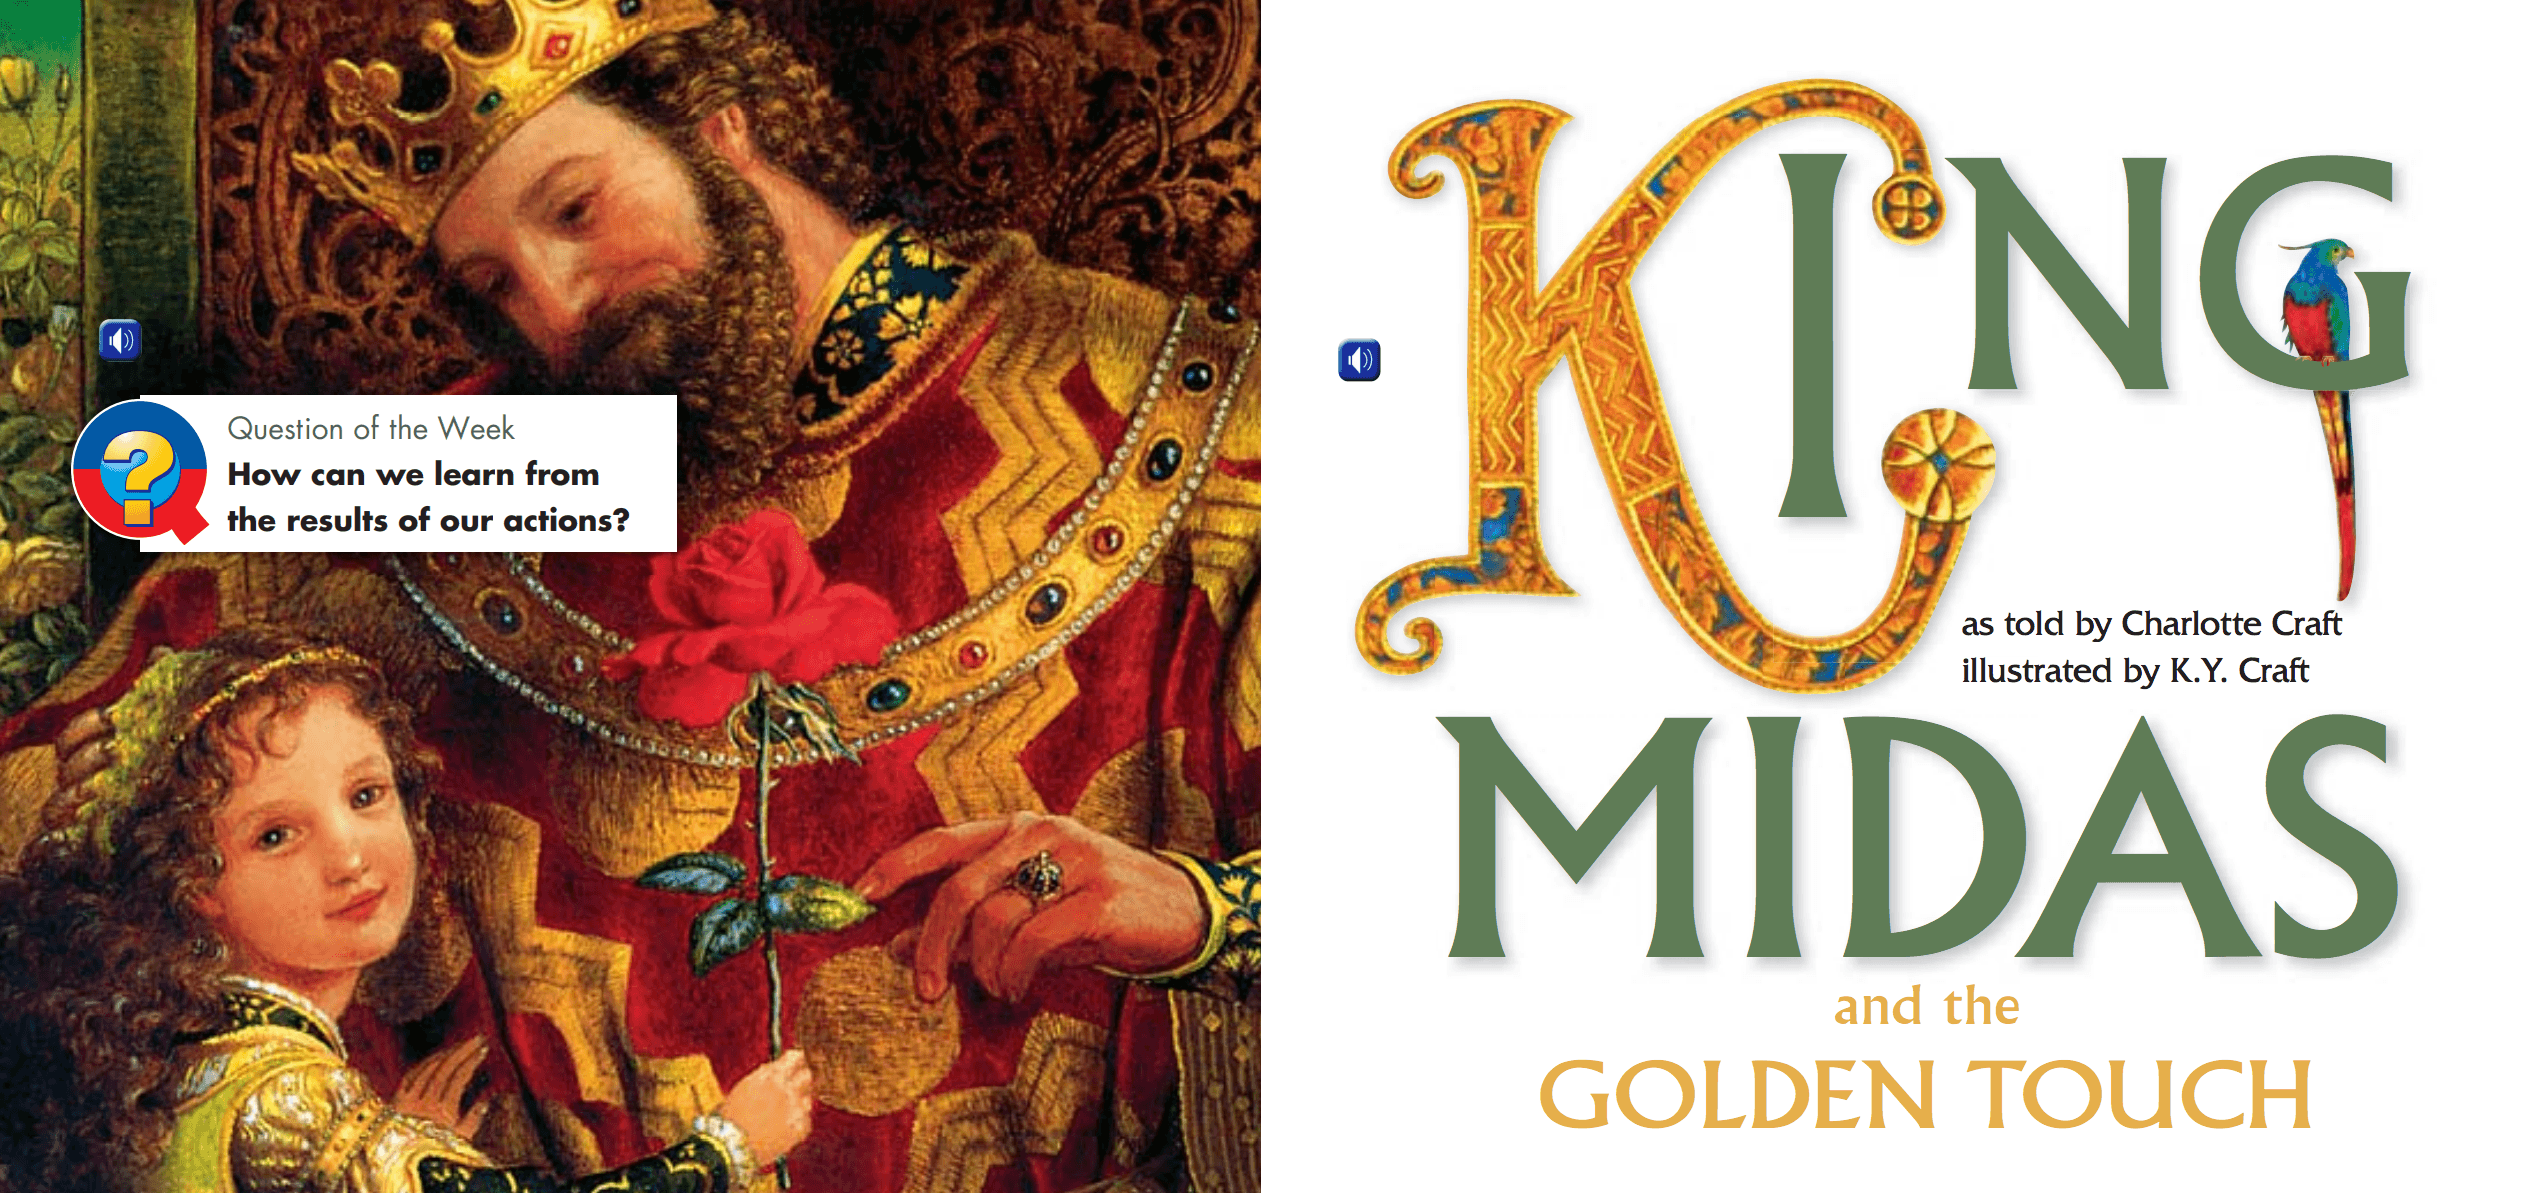 King Midas and His Golden Touch